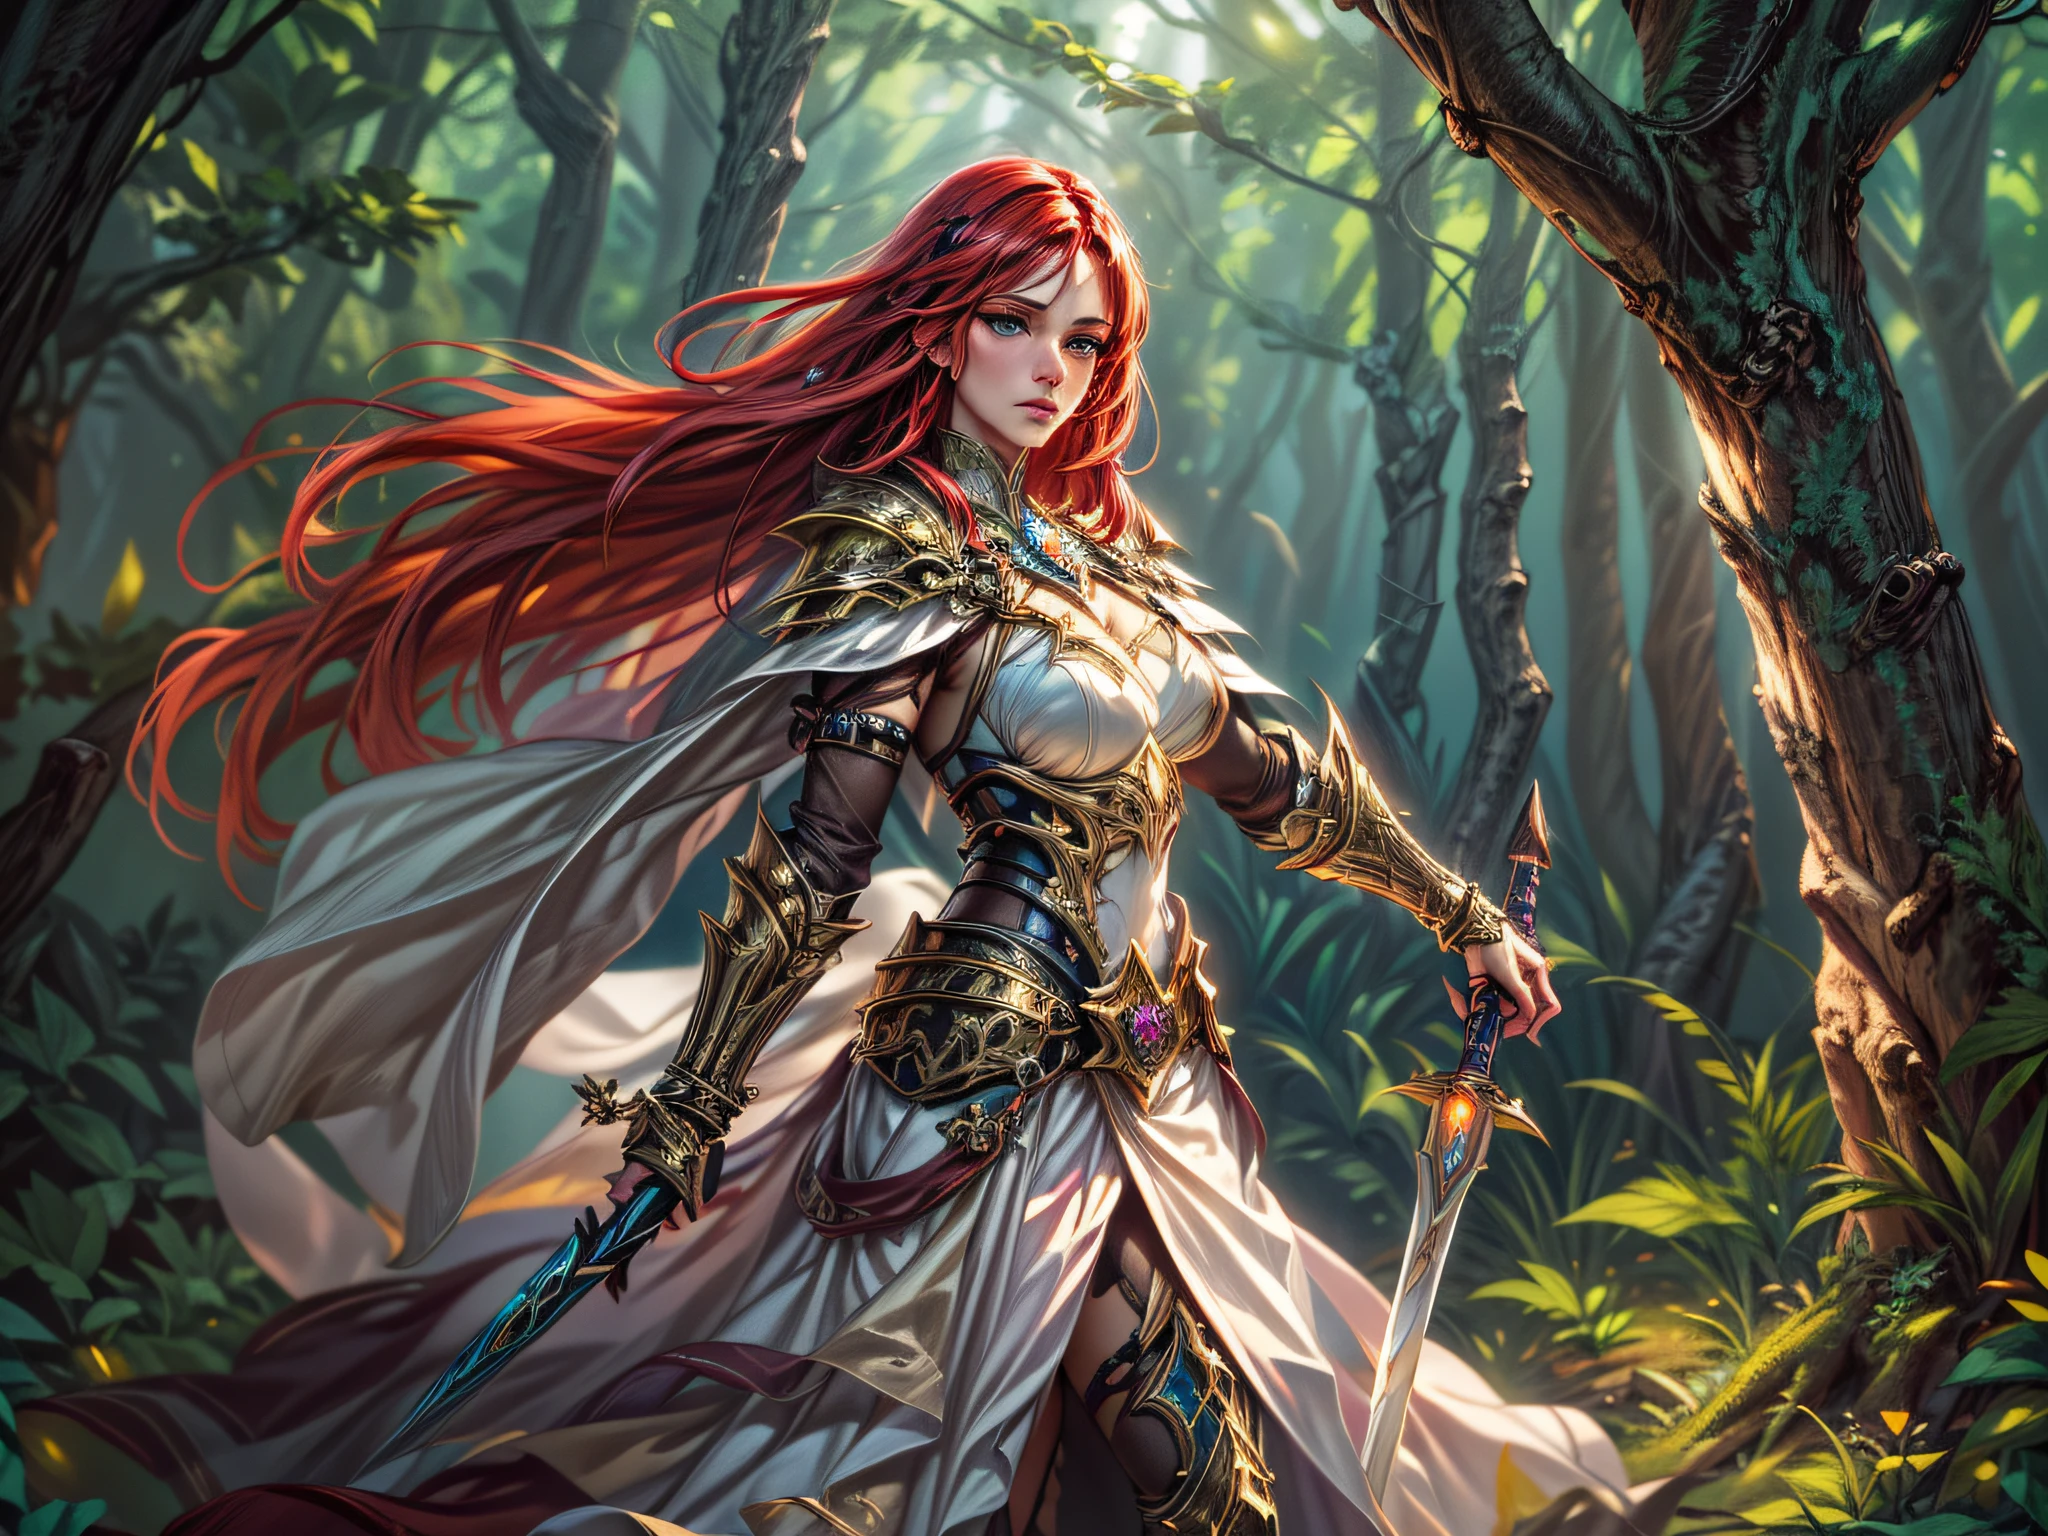 a picture of woman paladin of nature protecting the forest, controlling magical plants, tanjoreai, a woman holy knight, protector of nature, red hair, long hair, full body (best details, Masterpiece, best quality :1.5), ultra detailed face (best details, Masterpiece, best quality :1.5), ultra feminine (best details, Masterpiece, best quality :1.5), red hair, long hair, braided hair, pale skin, blue eyes, intense eyes, wearying heavy armor, white armor (best details, Masterpiece, best quality :1.5), green cloak, flowing cloak, armed with a sword, glowing sword fantasysword sword, fantasy forest background, D&D art, RPG art, fantasy art, magical atmosphere magic-fantasy-forest, ultra best realistic, best details, best quality, 16k, [ultra detailed], masterpiece, best quality, (extremely detailed), ultra wide shot, photorealistic, depth of field, hyper realistic painting, illustrated